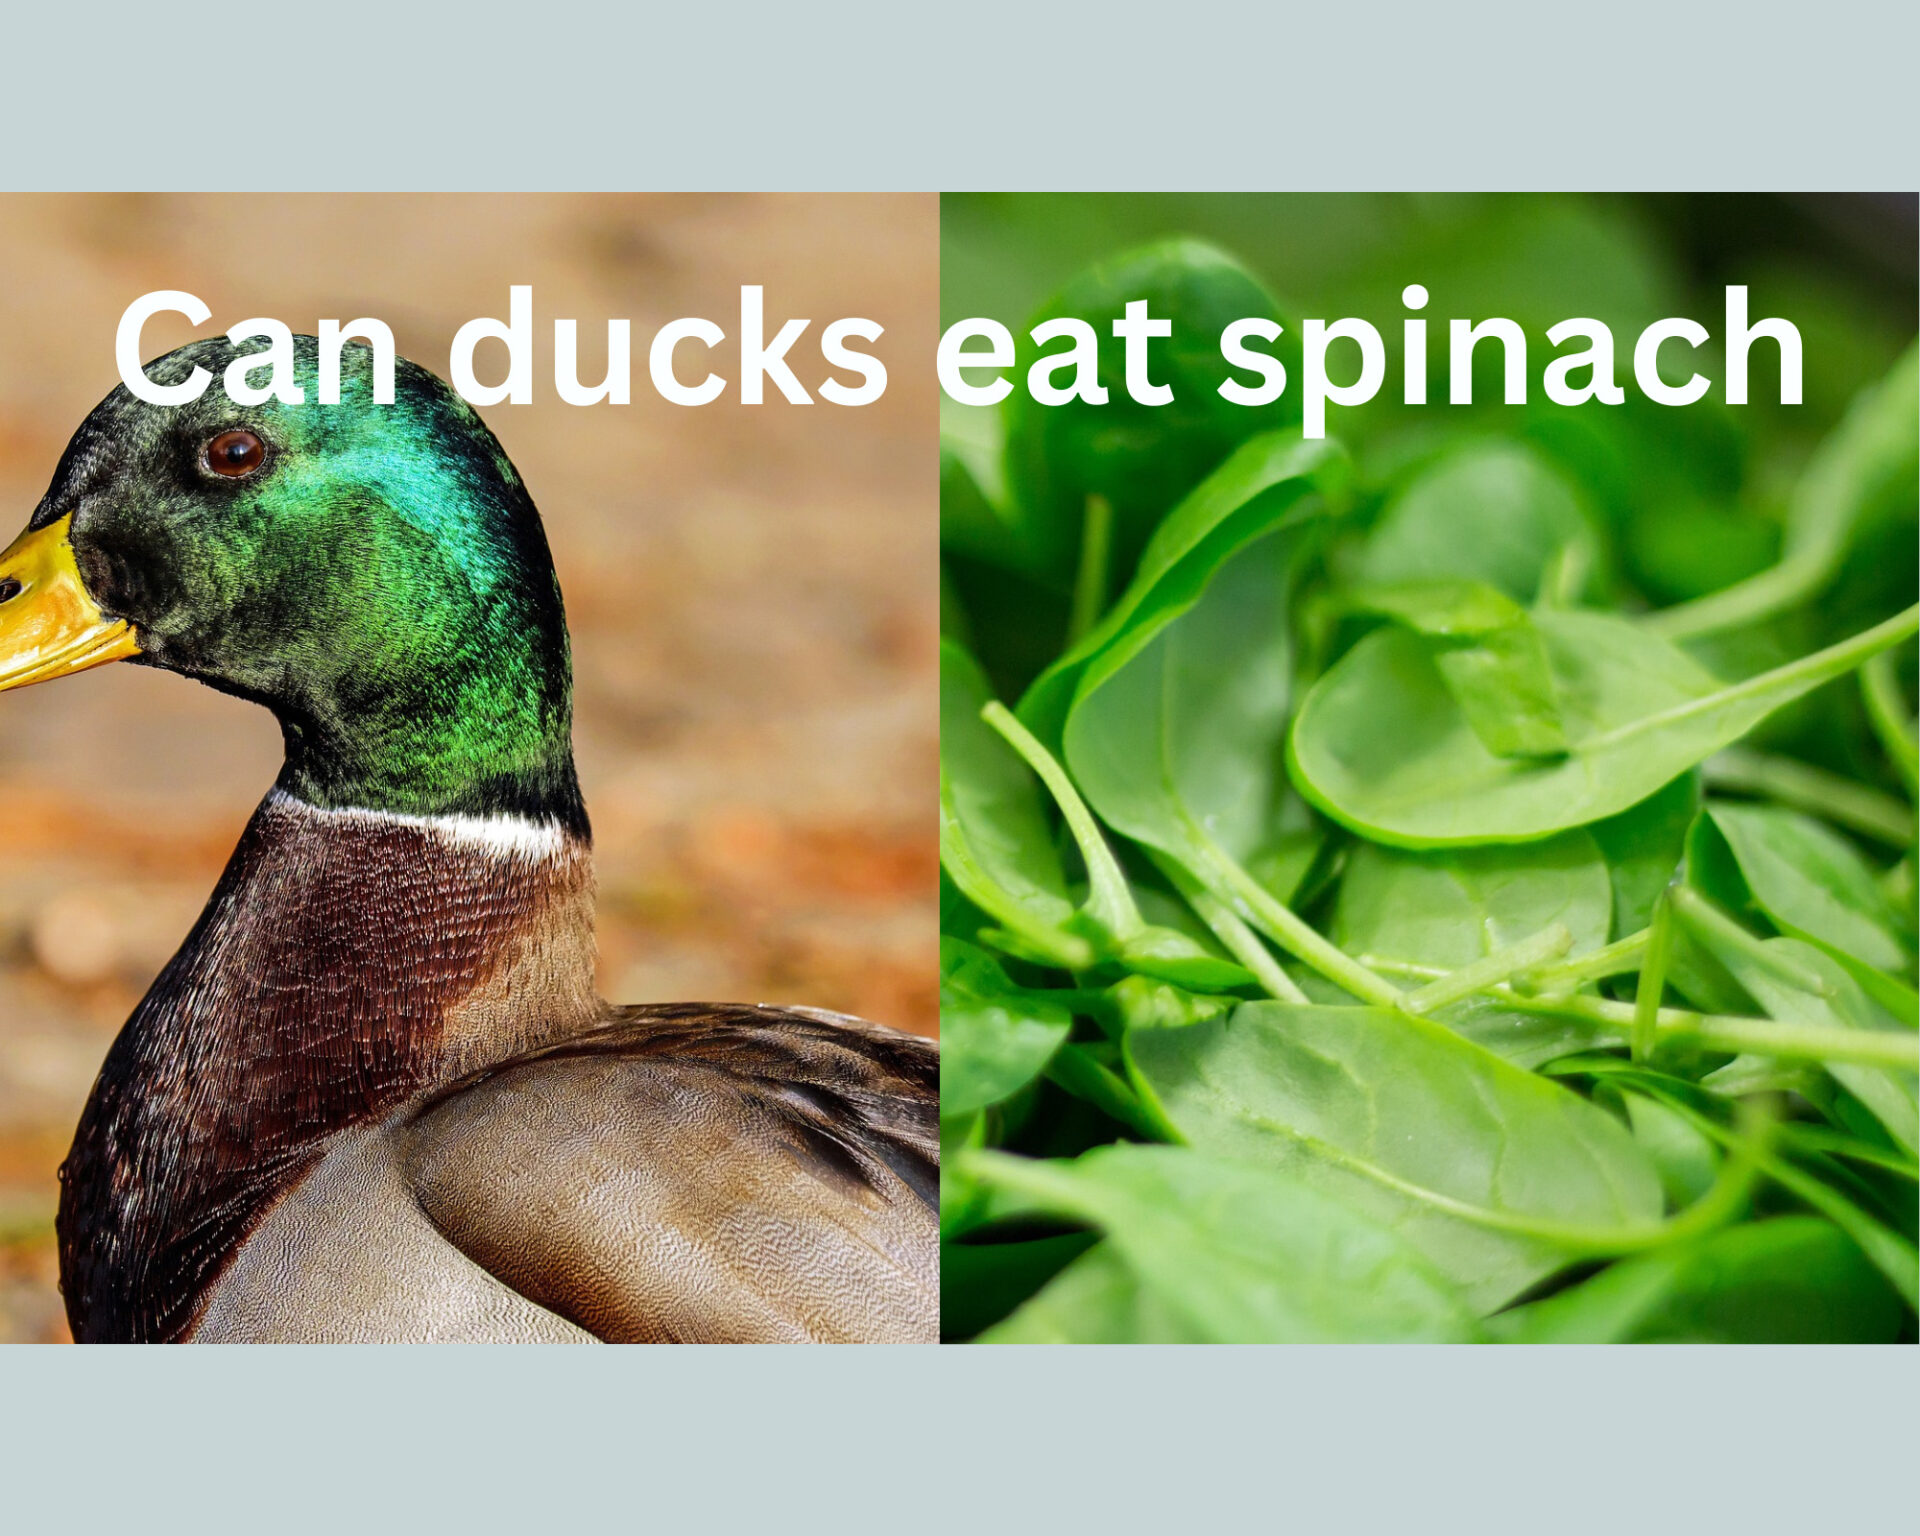 Can Ducks Eat Spinach?